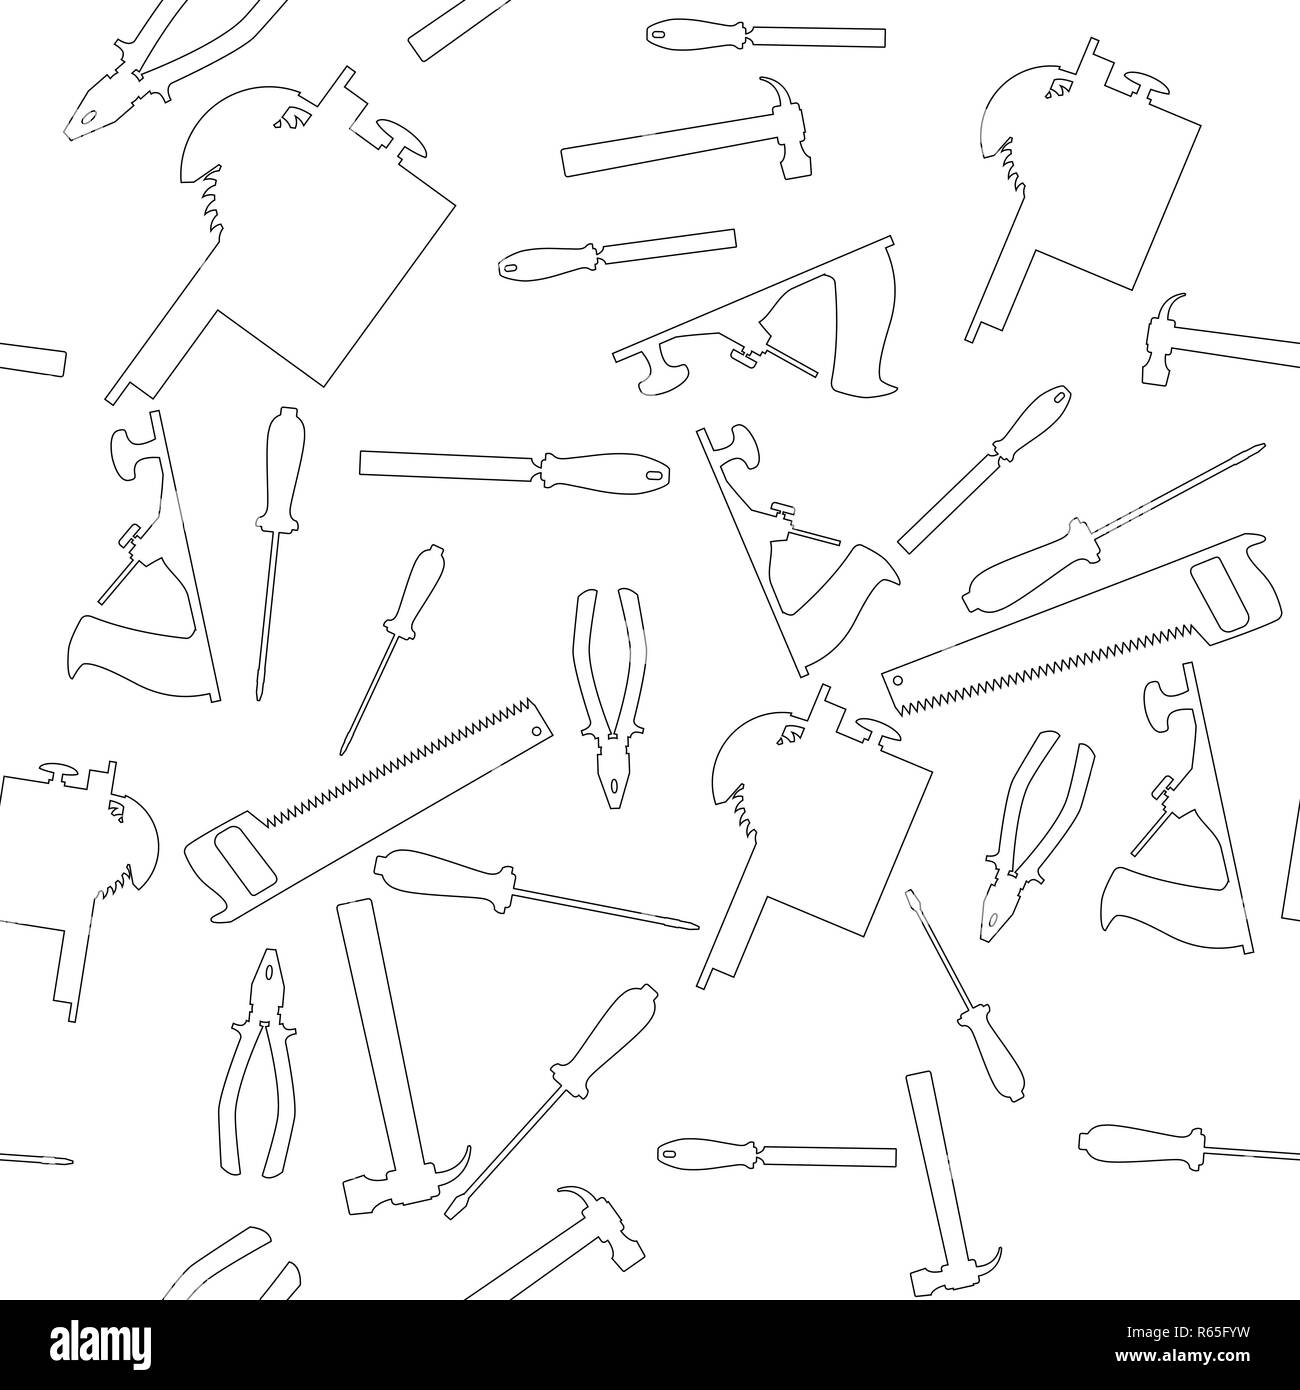 Vector pattern in flat style - hand tools for repair and woodwork Stock Vector